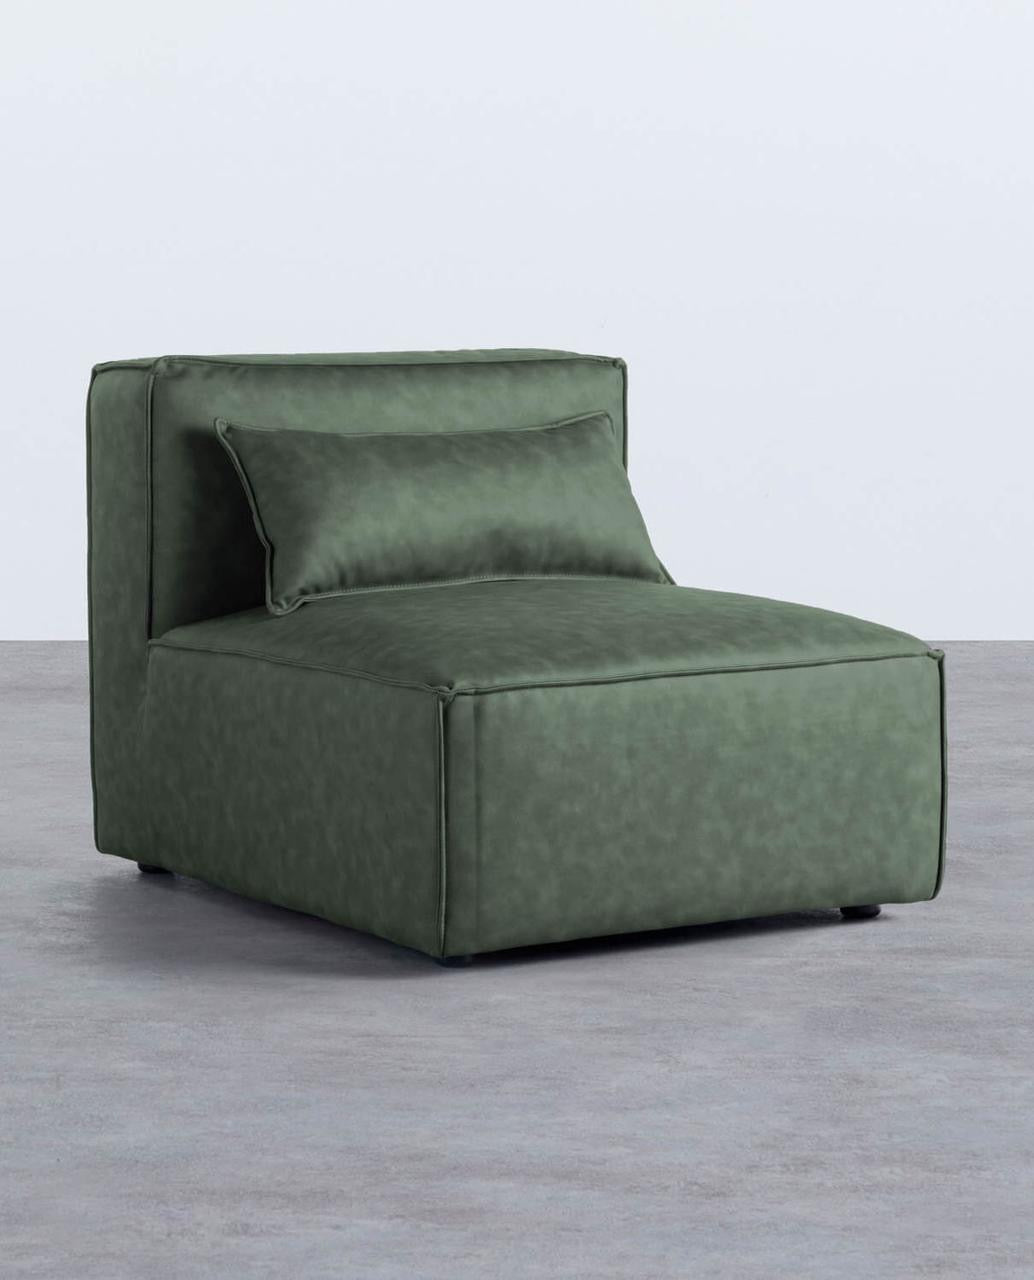 Modular sectional sofa pieces with backrest